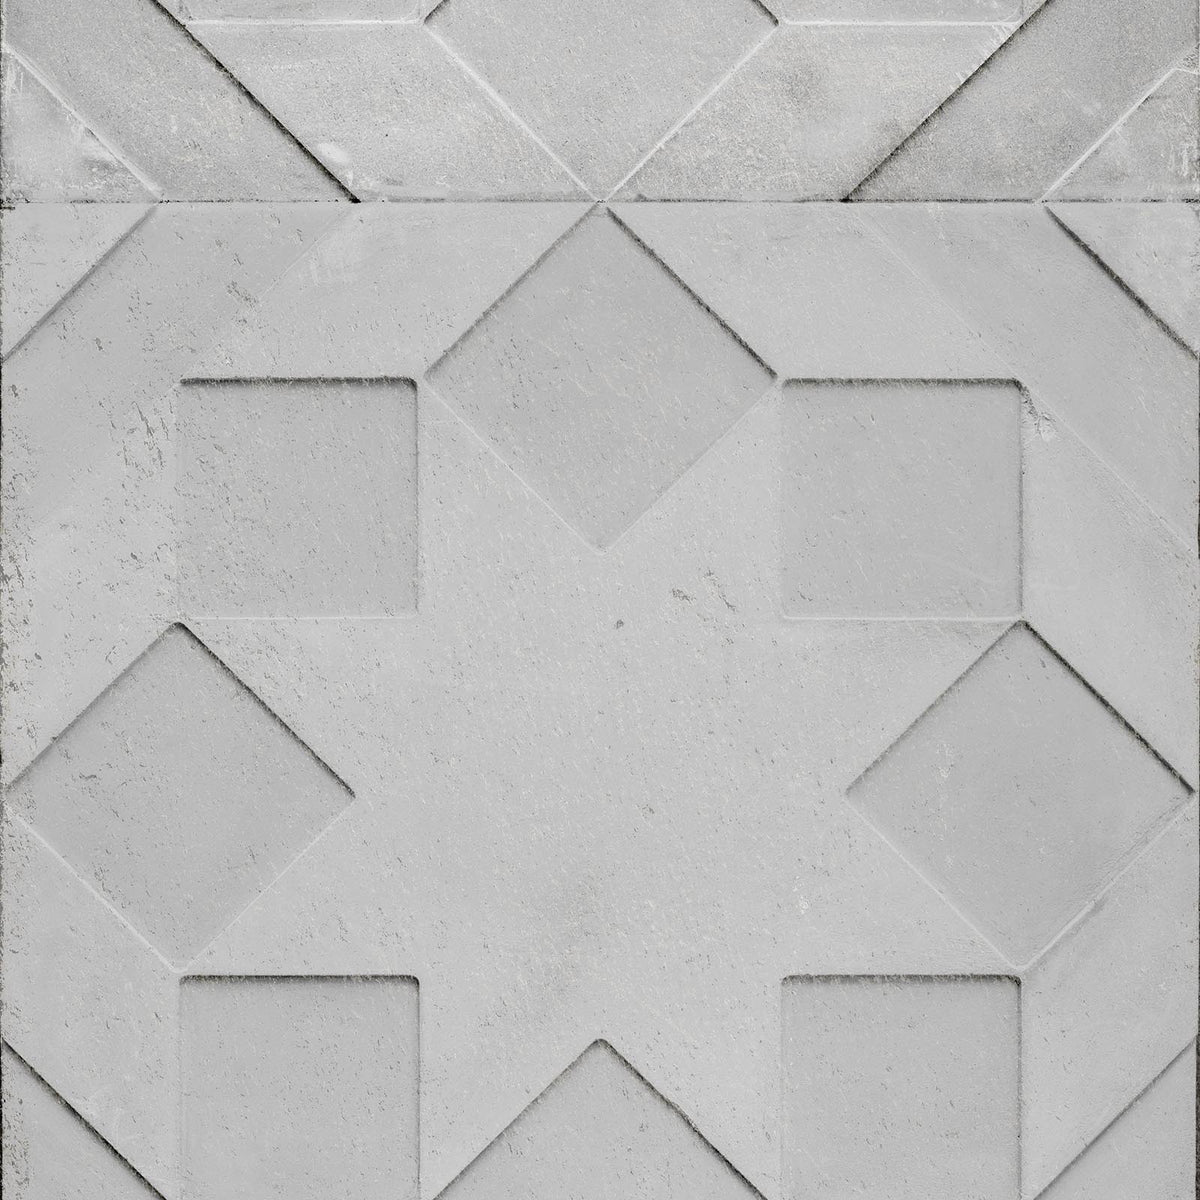 NDE-02 Star Moulded Concrete wallpaper by Nada Debs for NLXL